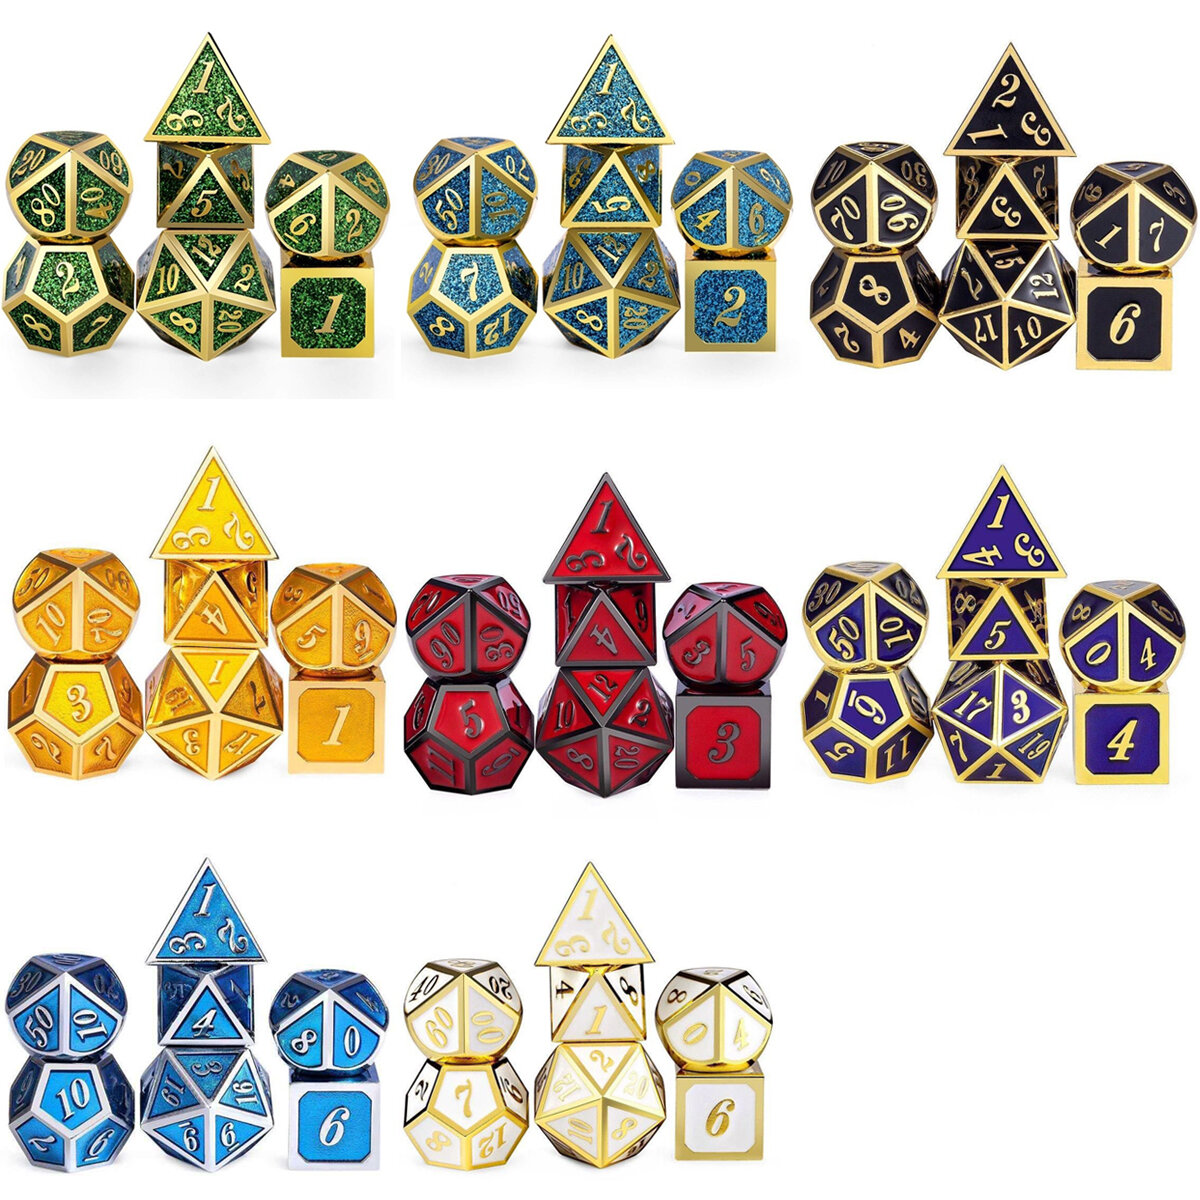 7 Pcs/Set Metal Dice Set Role Playing Dragons Table Board Game Toys With Cloth Bag Bar Party Game Di